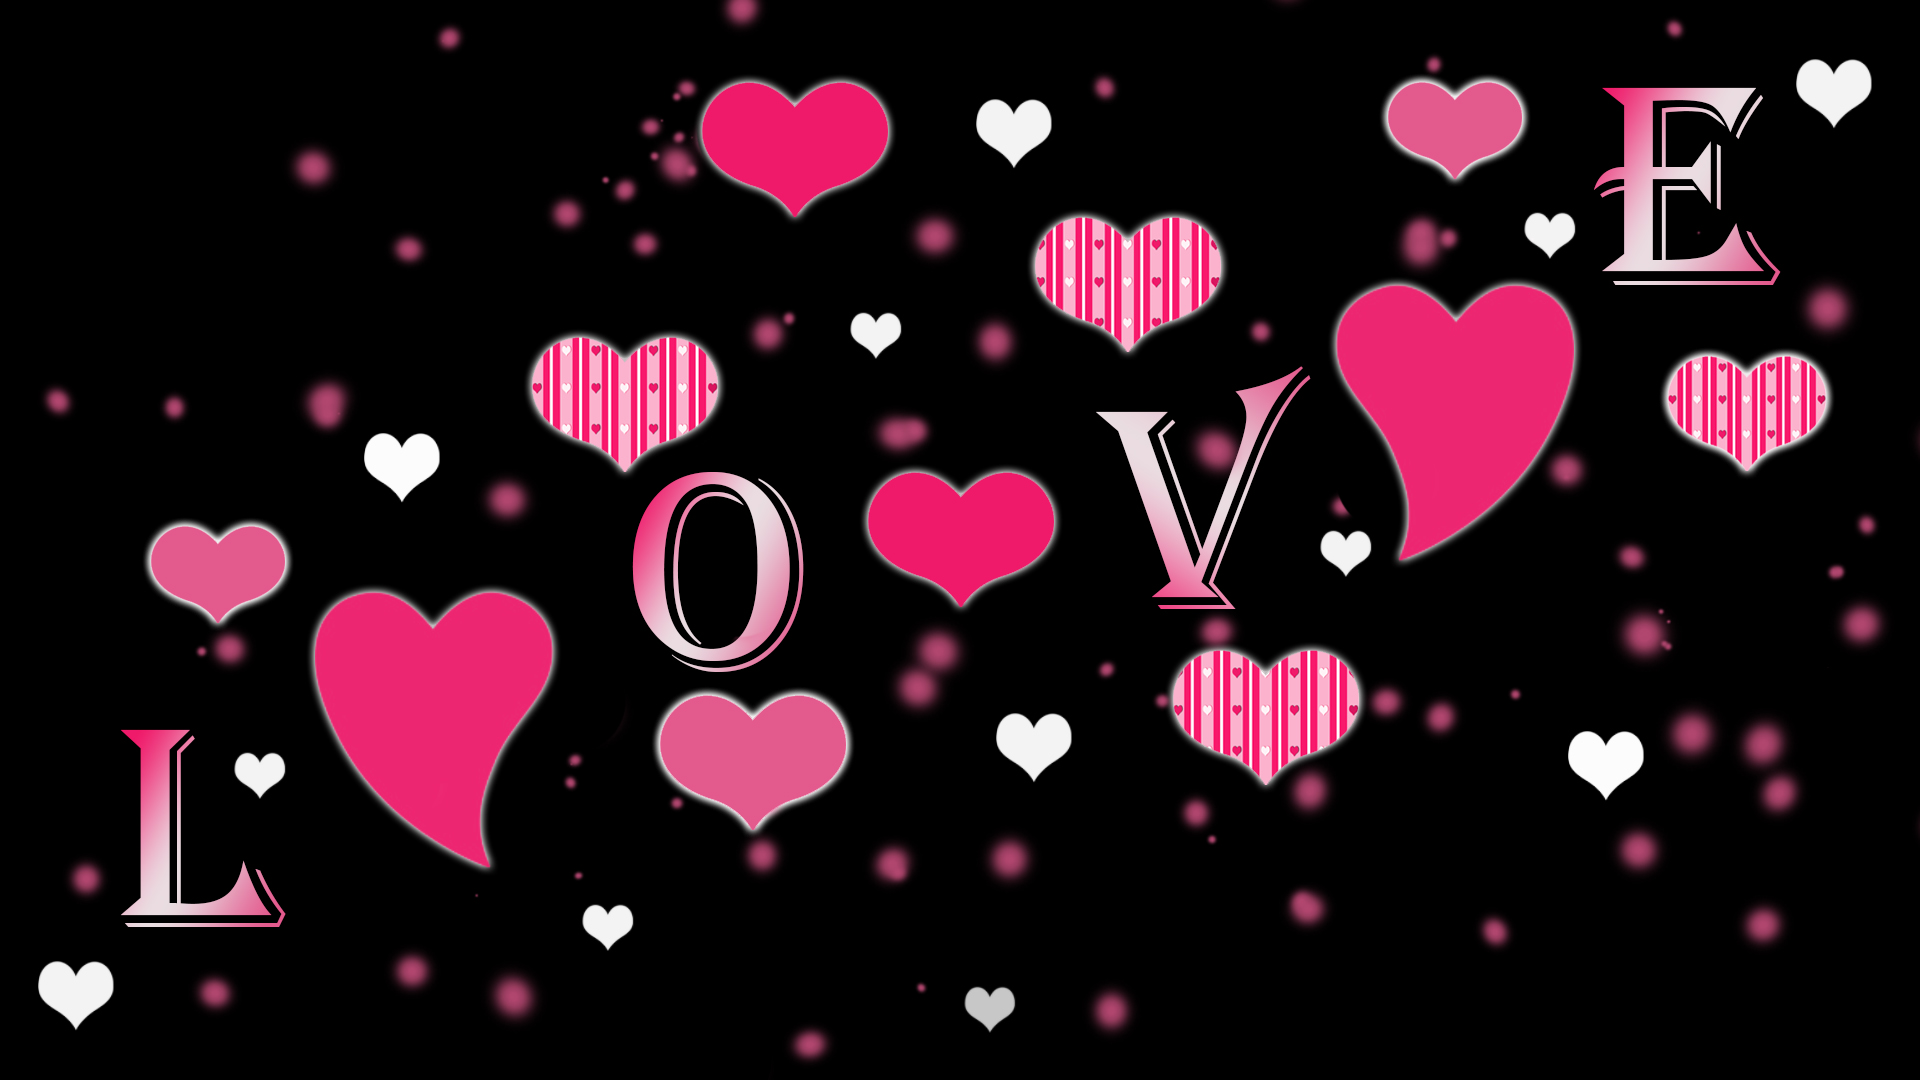 1920x1080 Abstract, Holiday, Heart, Black, Artistic, Pink, Love, Valentines Day wallpaper JPG Gallery HD Wallpaper